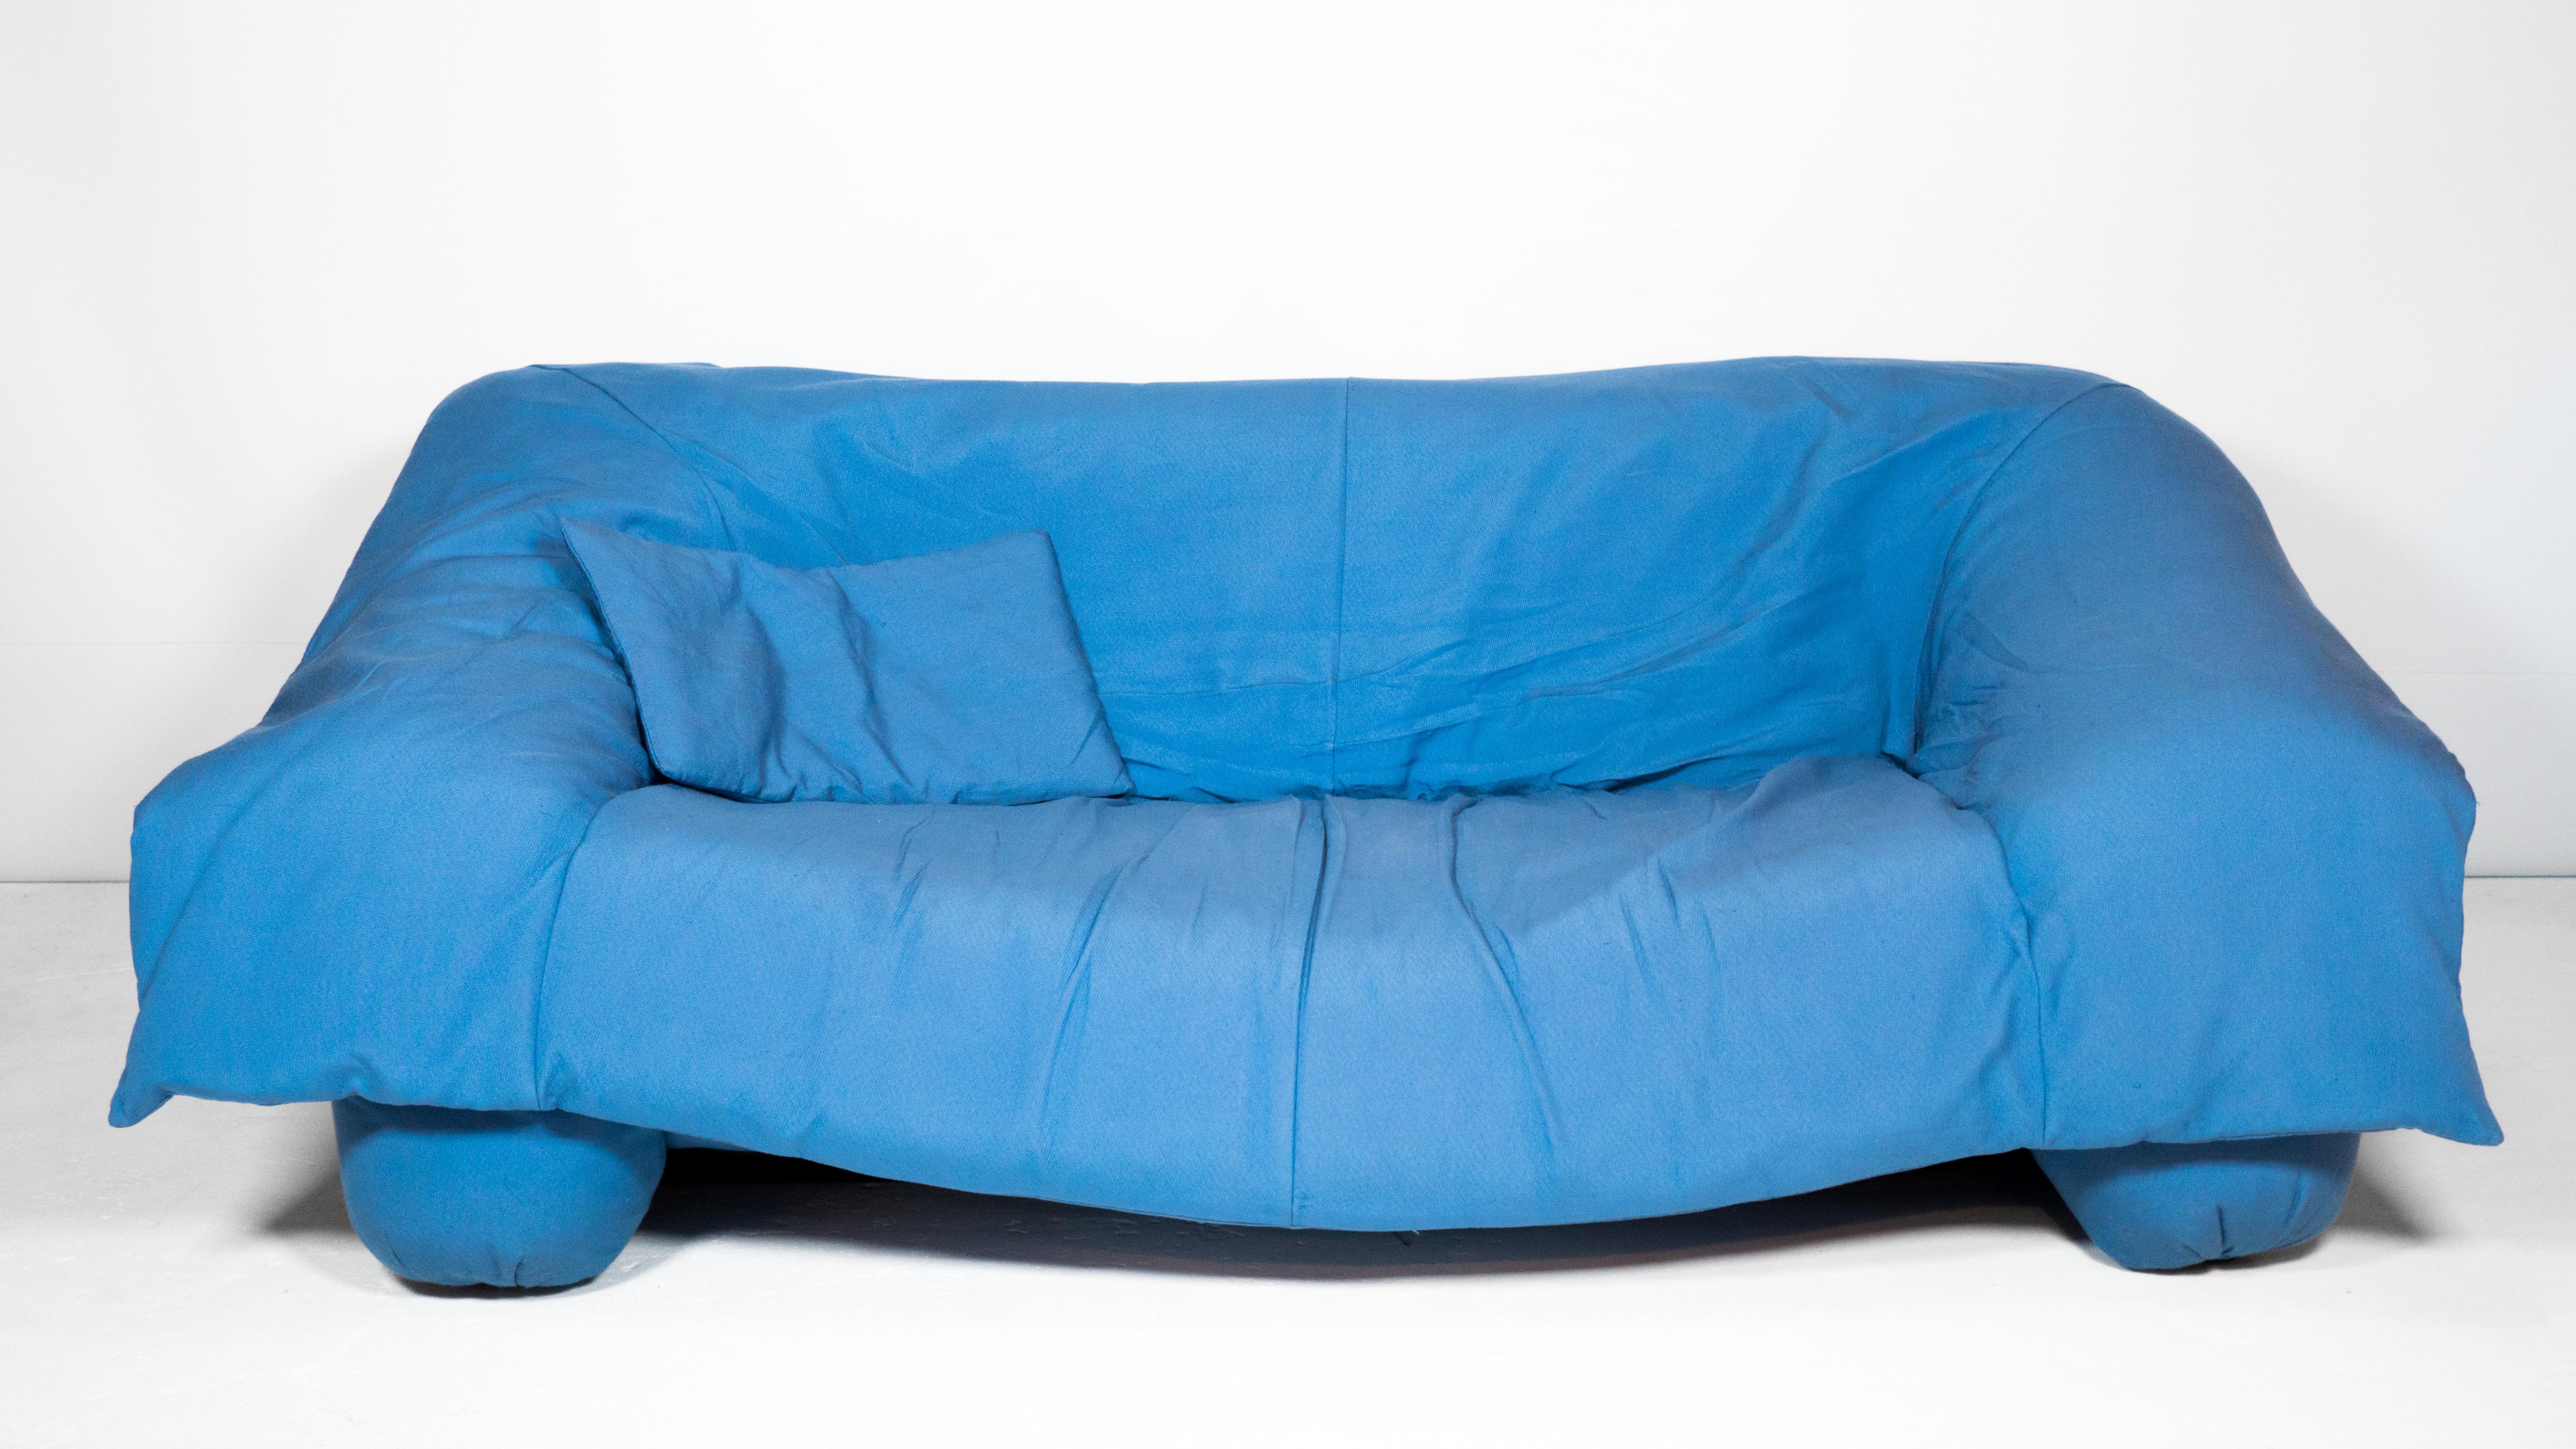 Flou Flou' sofa designed by renowned Italian trio Jonathan De Pas, Donato D’Urbino and Paolo Lomazzi, for Ligne Roset, circa 1988. Wrapped in original soft blue upholstery with matching pillow. Delightfully playful design that creates a soft,